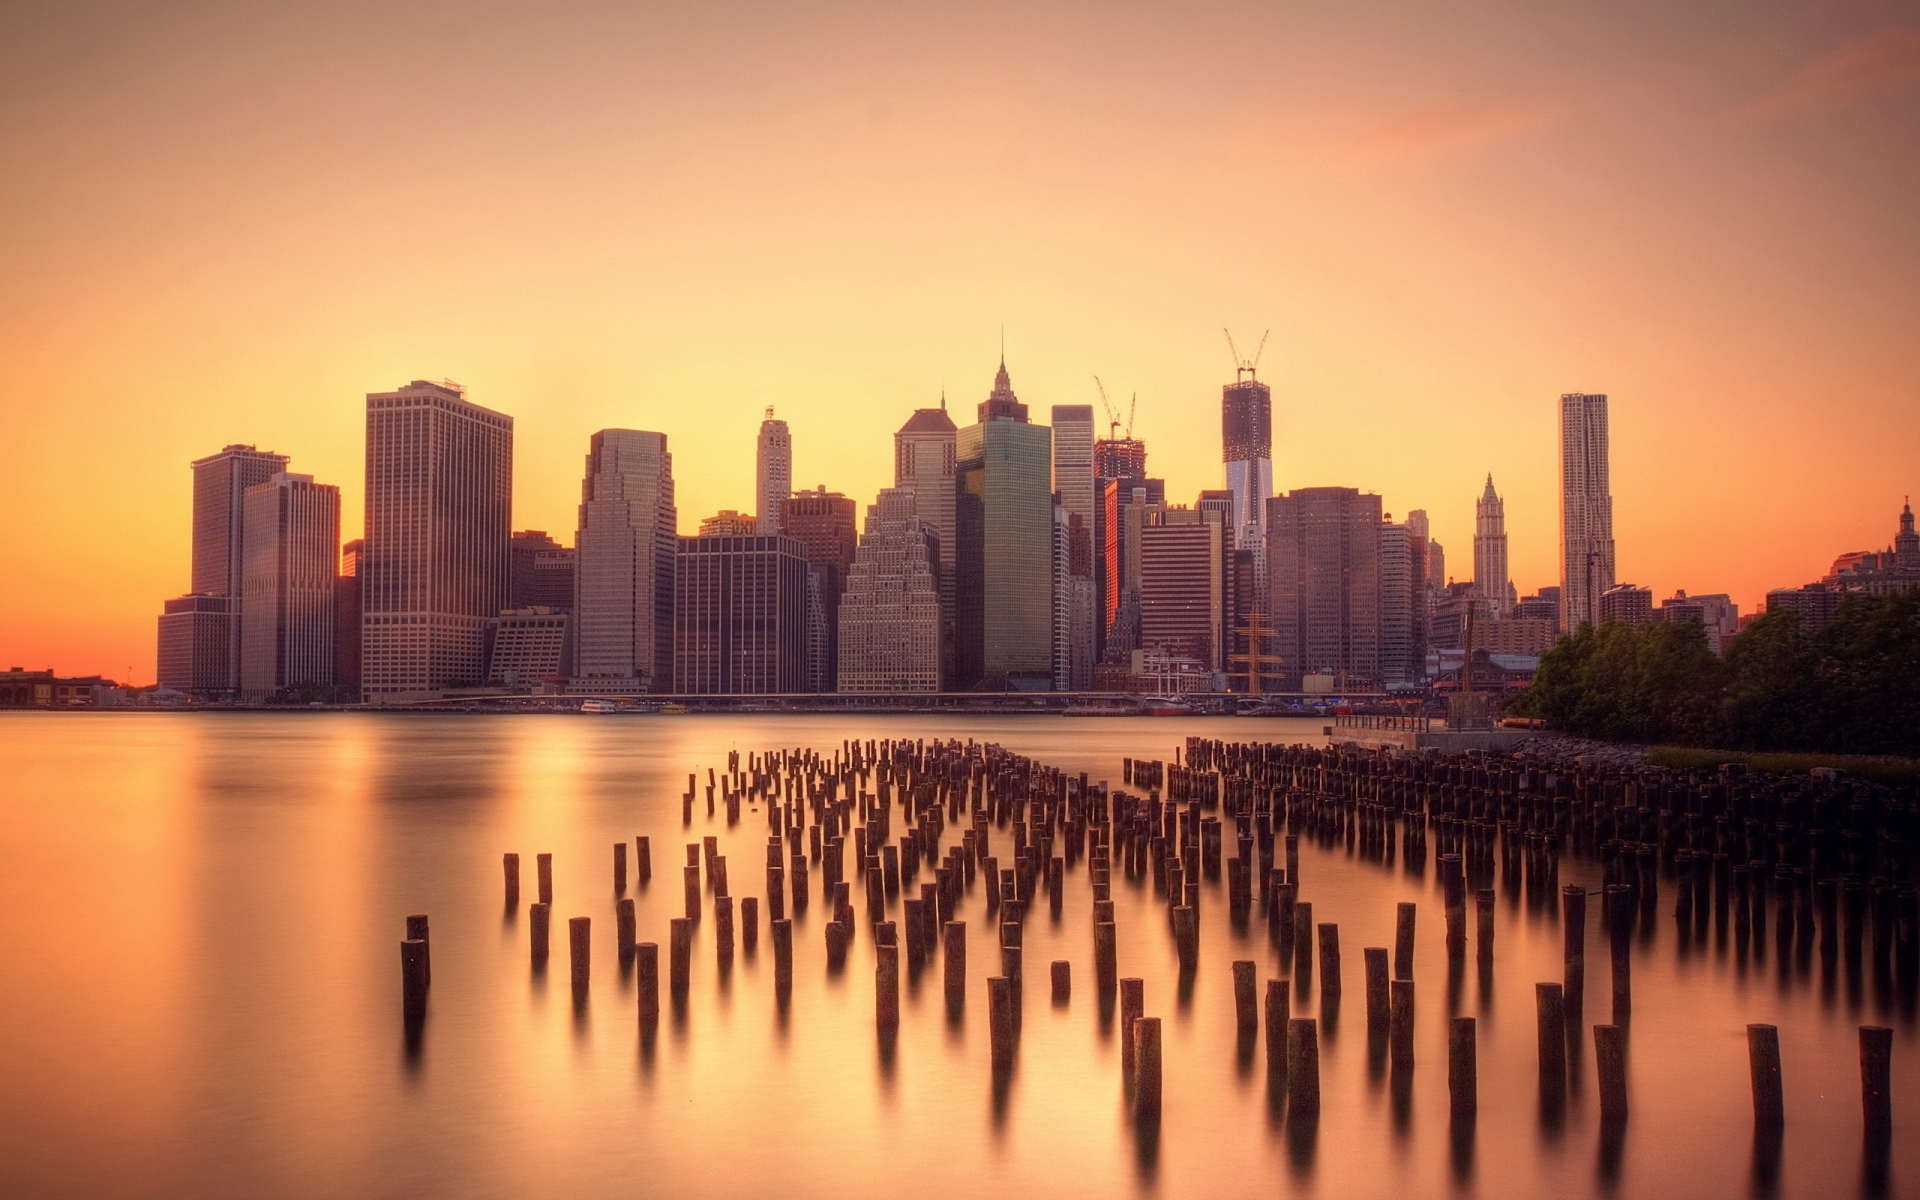 nyc Full HD Wallpaper and Background Image | 1920x1200 | ID:303891